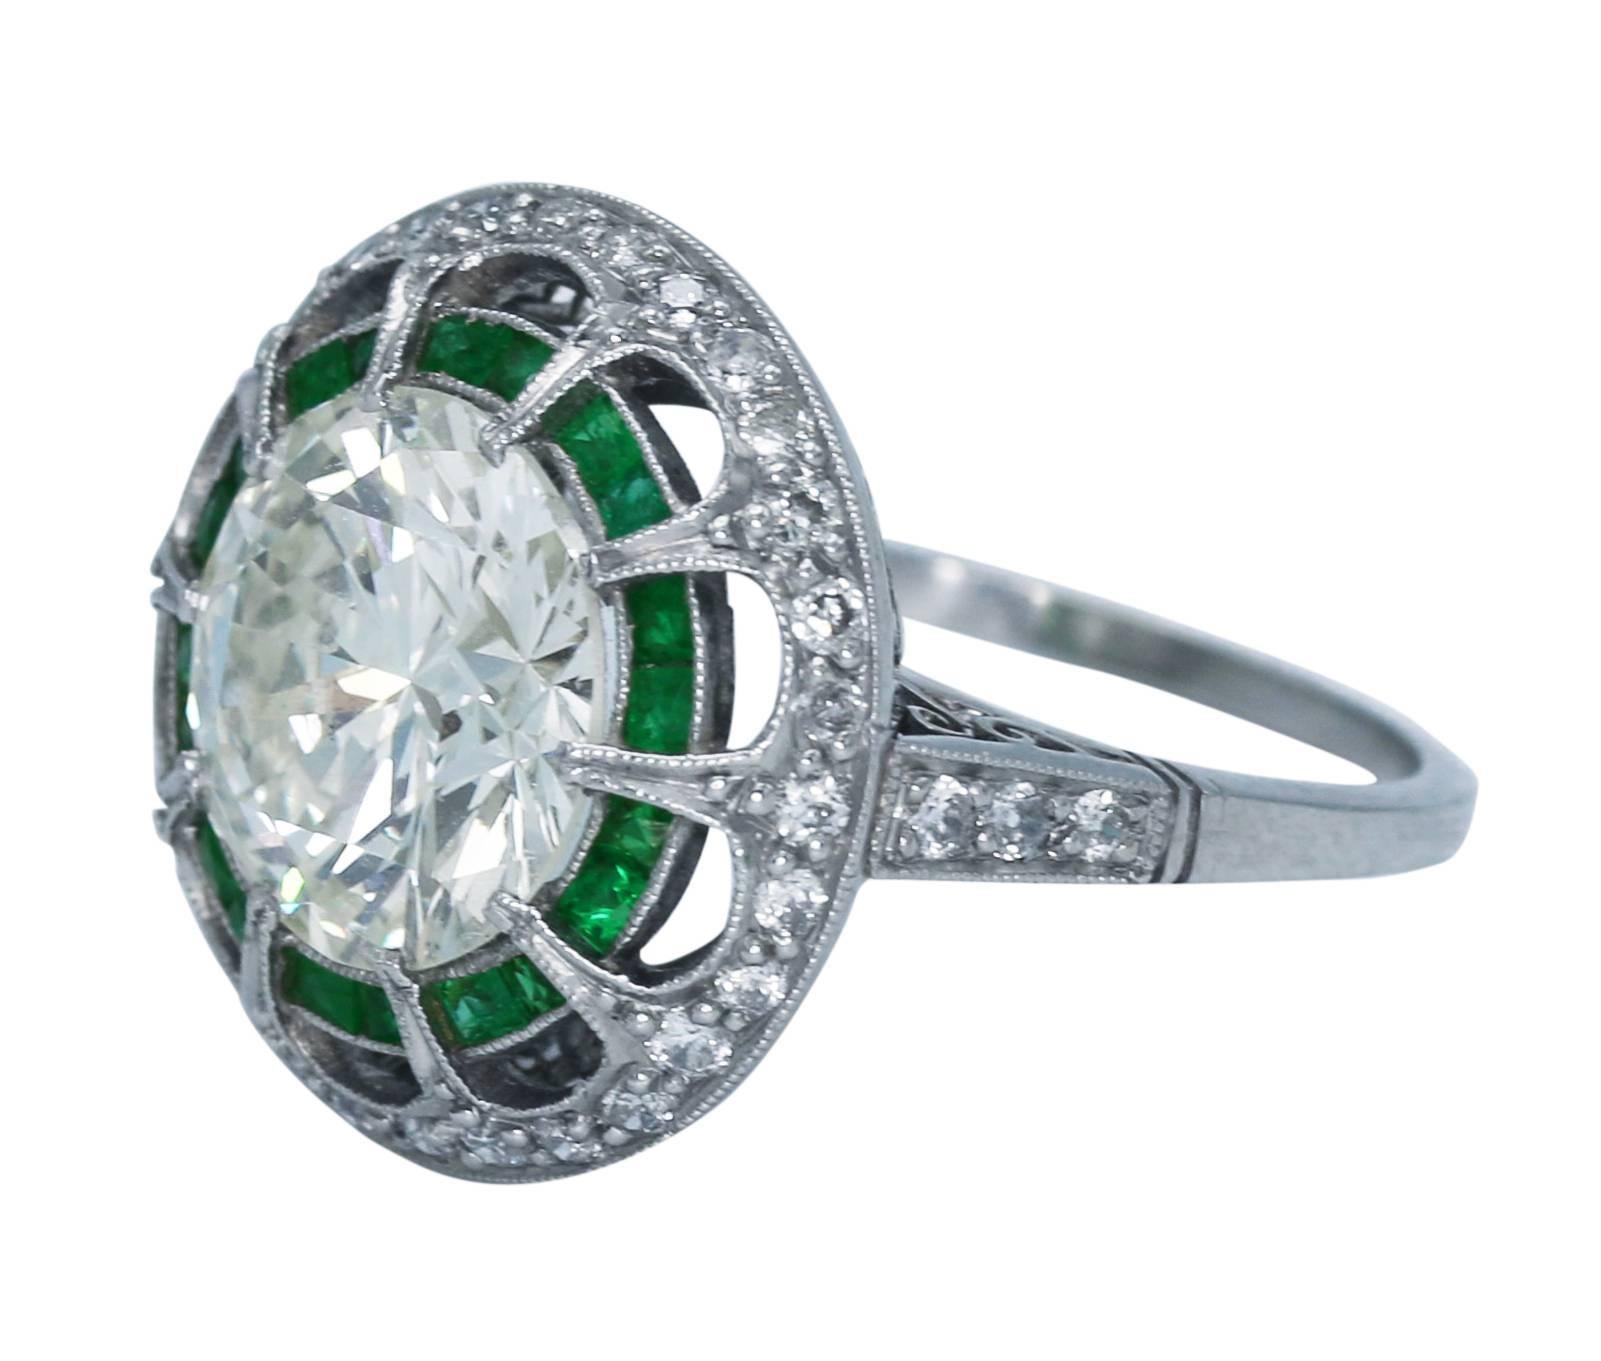 An Art Deco Style ring set in the center with a round diamond weighing 4.09 carats, within a frame of calibré-cut emeralds weighing approximately 0.80 carat, and diamonds weighing approximately 0.65 carat, size 6 3/4, mounted in platinum, gross